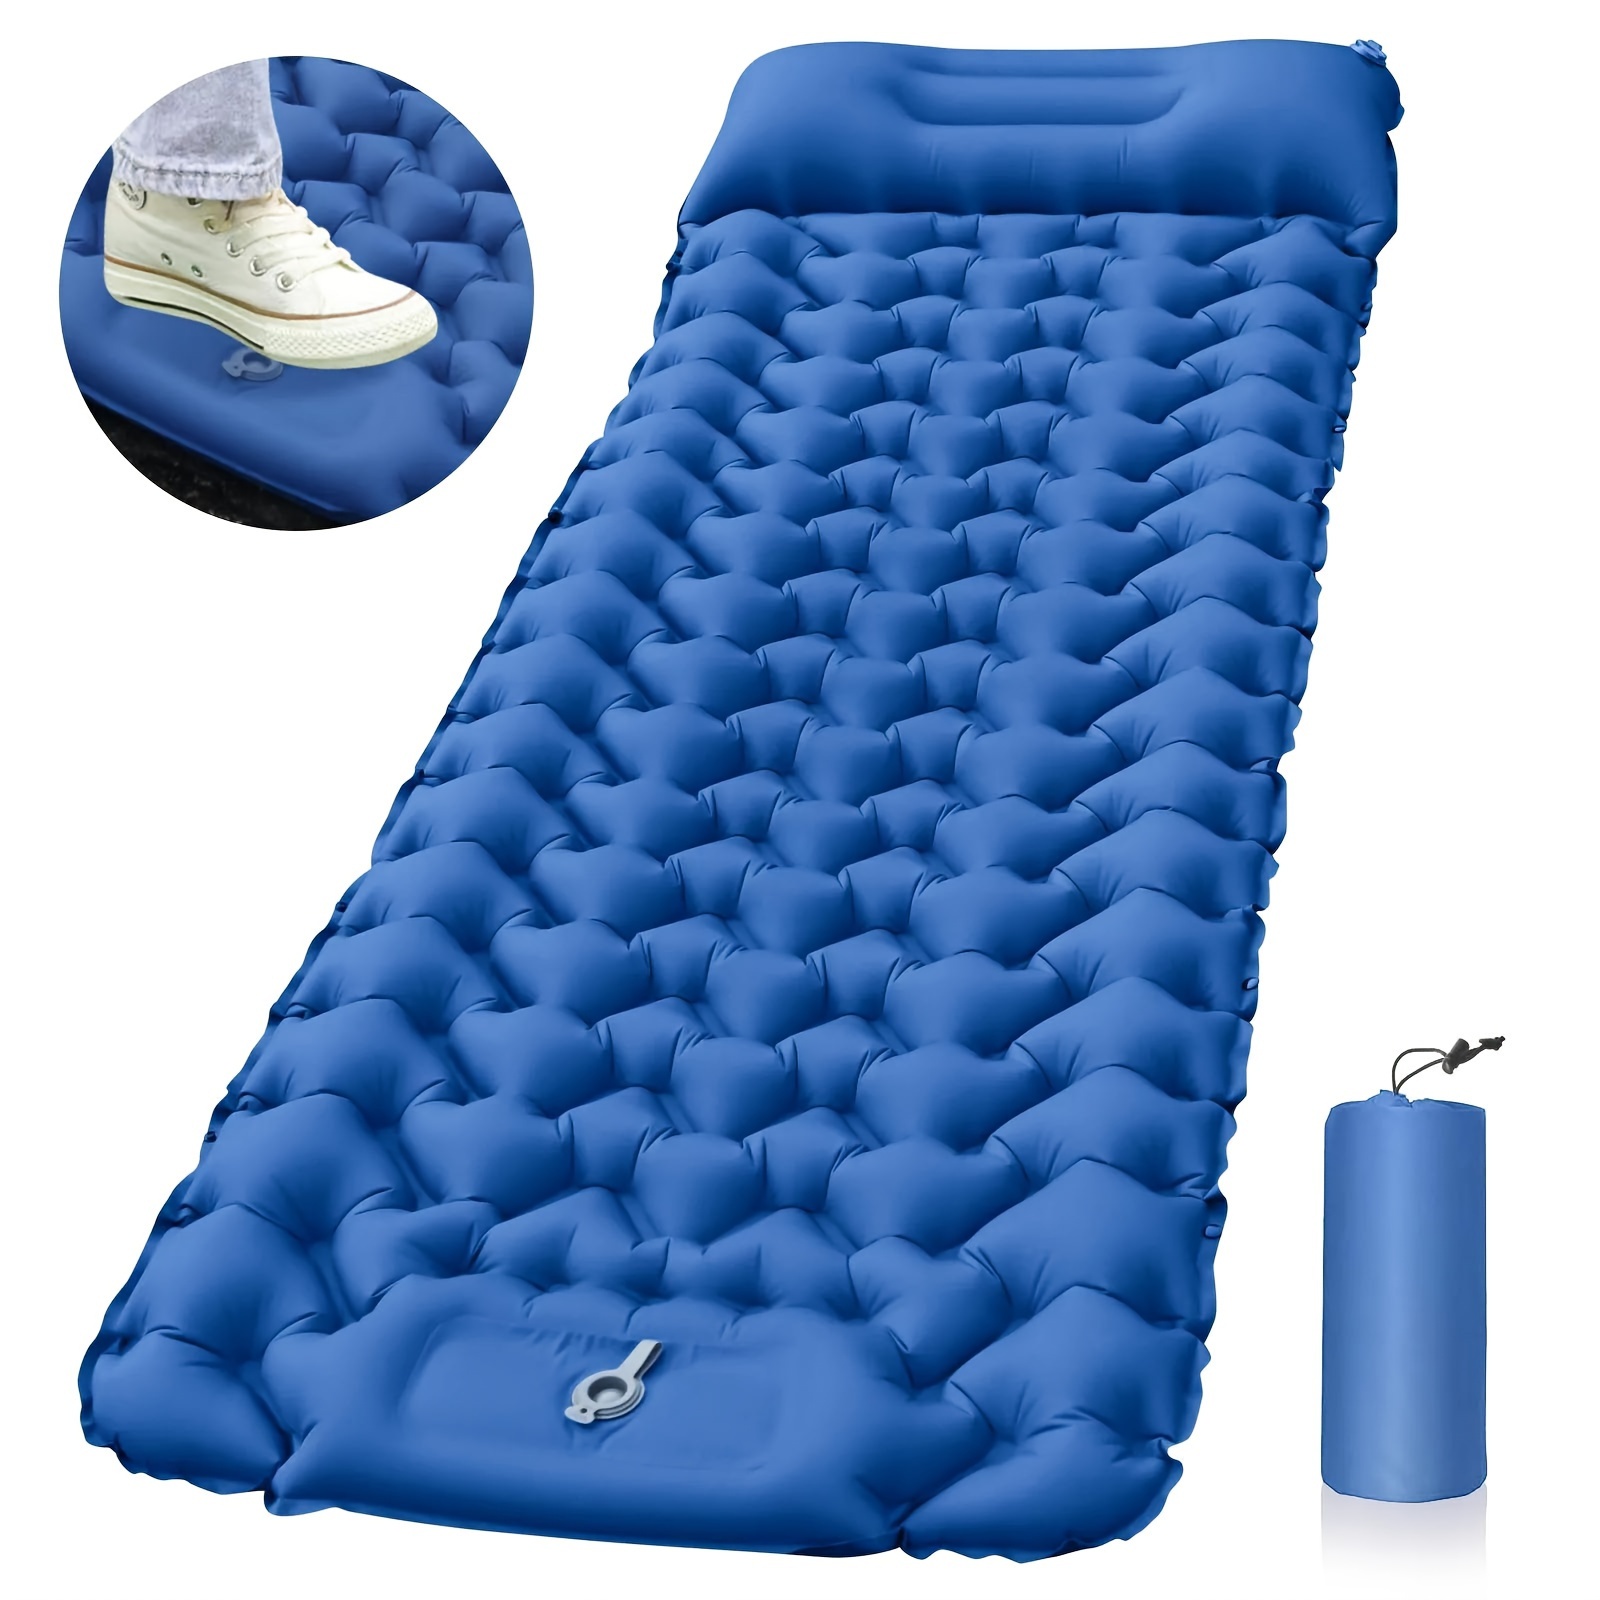 

Camping Inflatable Mattress With Pillows, Travel Folding Bed, Ultralight Air Cushion For Outdoor Hiking Trekking